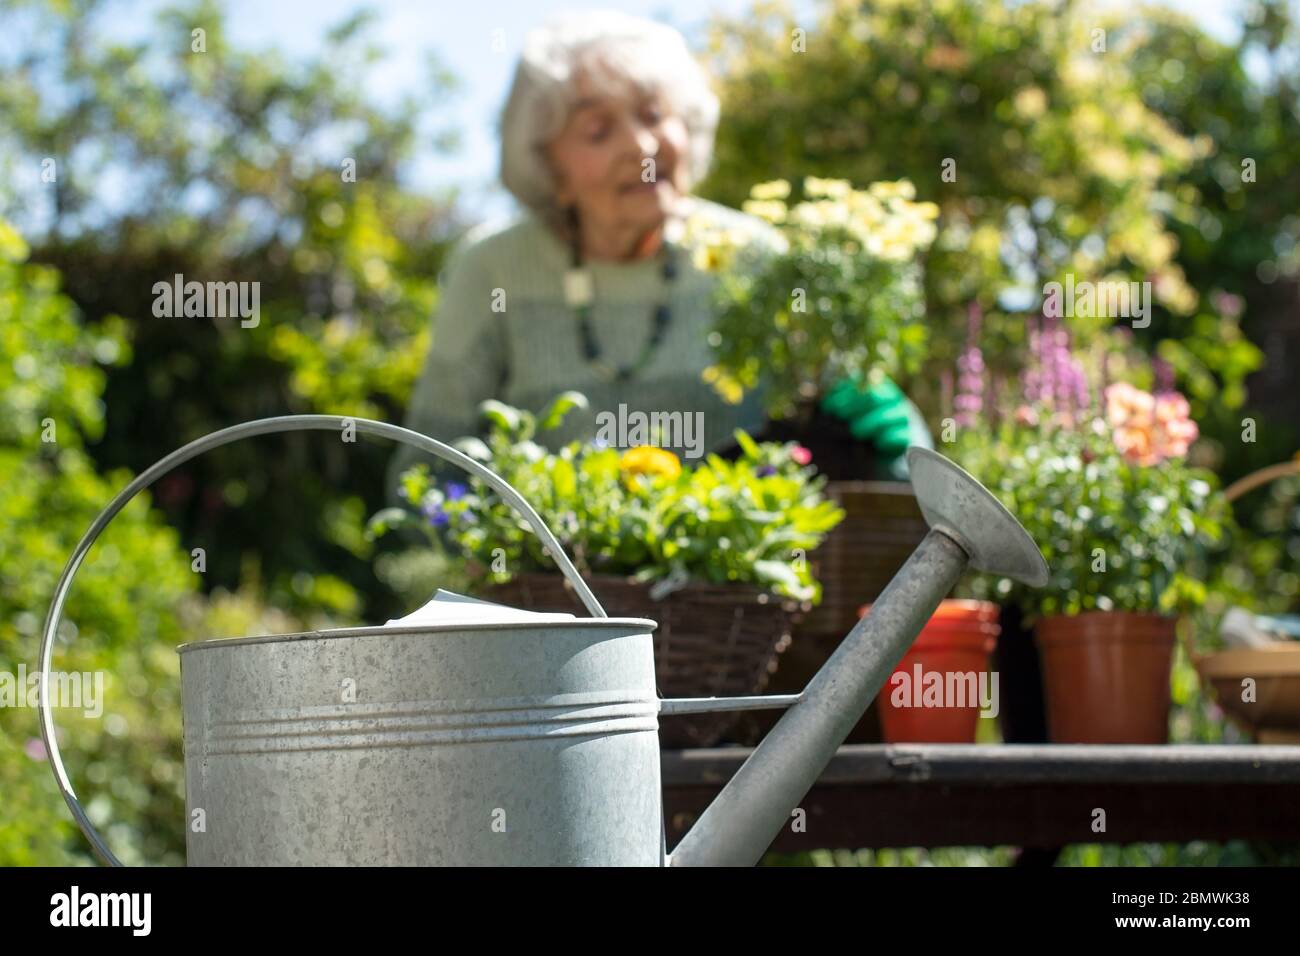 Senior Woman Gardening At Home With Watering Can In Foreground Stock Photo